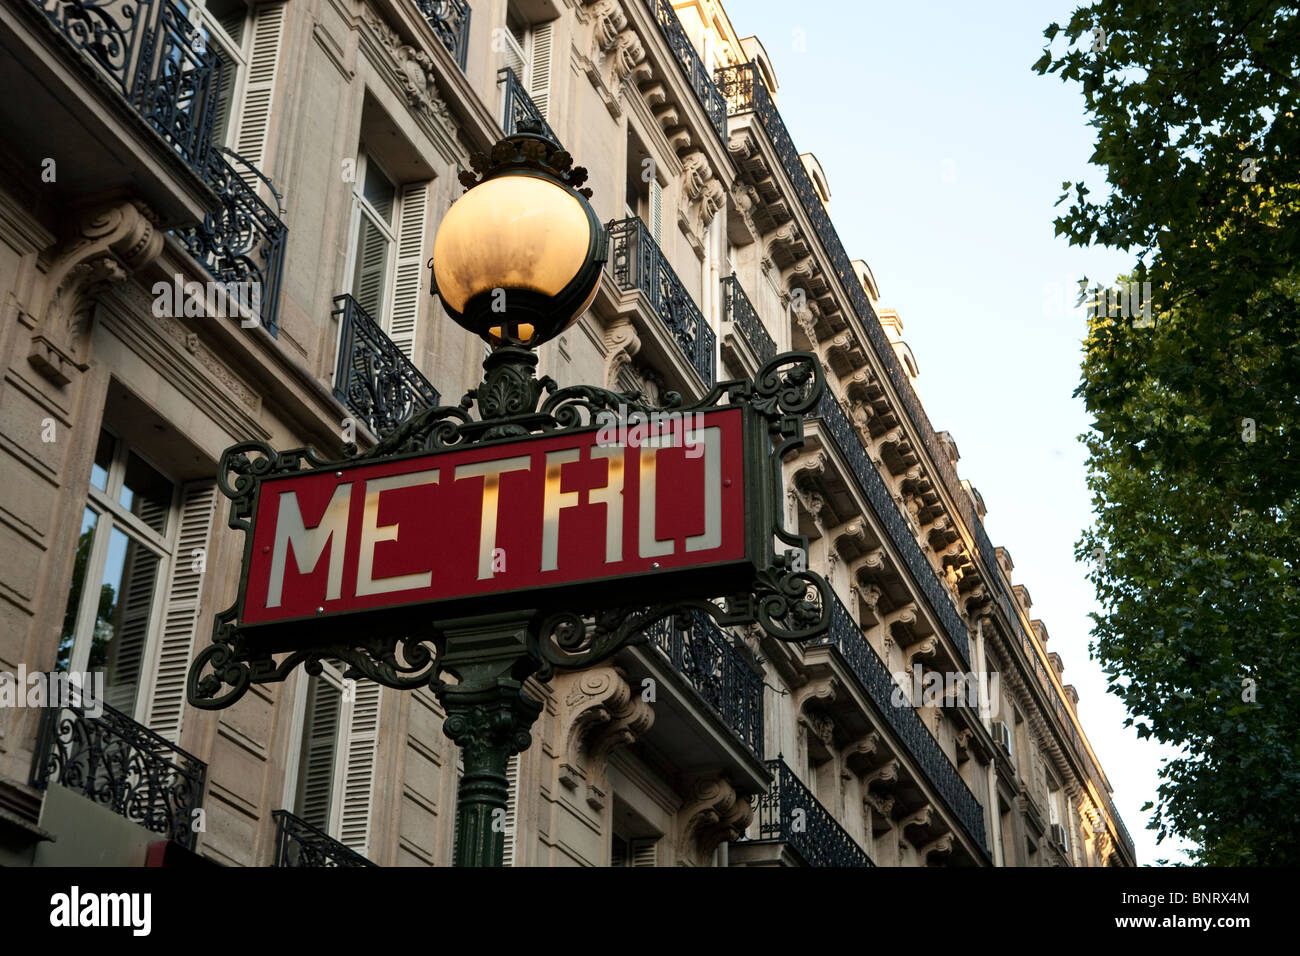 Iconic Paris image of Metro sign with typical French building in background Stock Photo